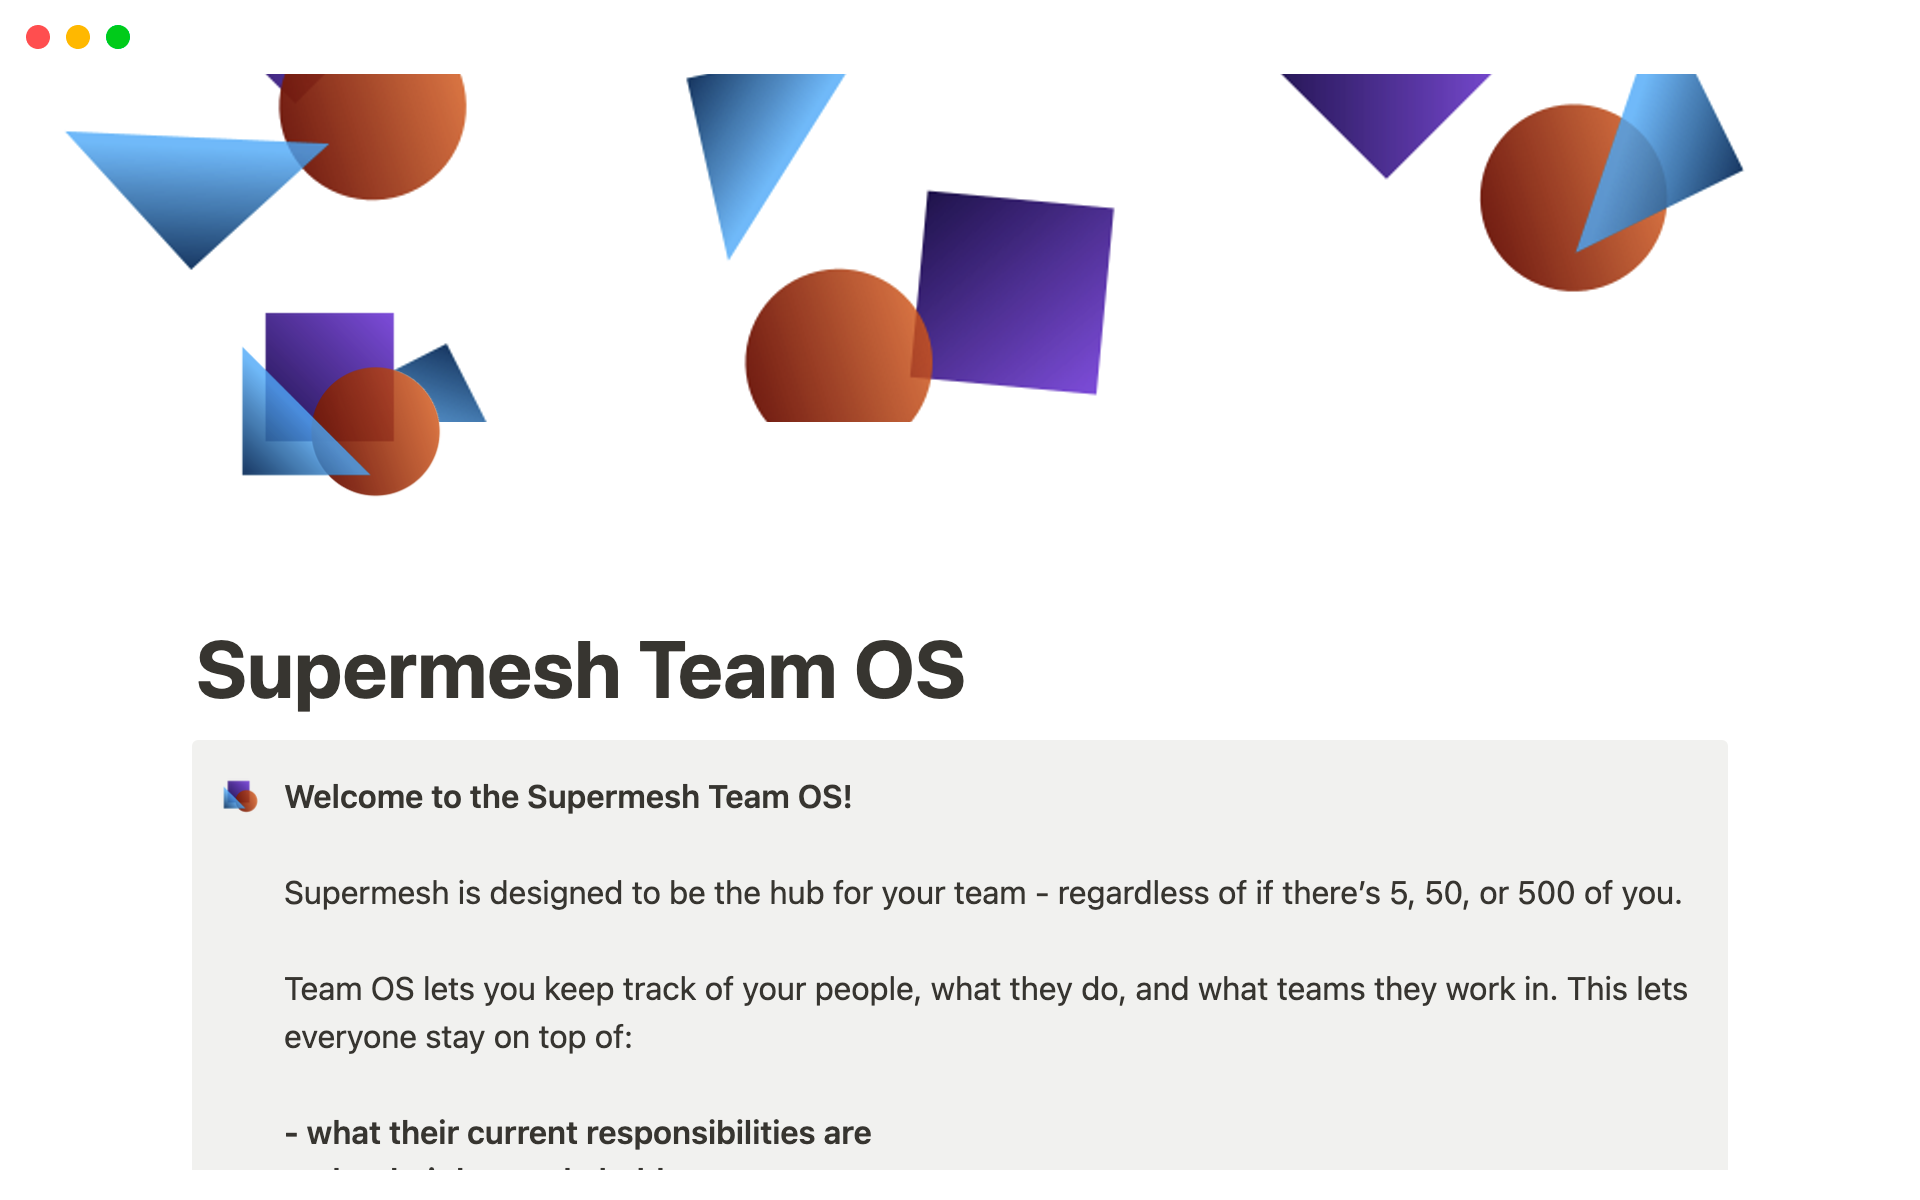 Supermesh lets you stay on top of your team - who's in it, what they do, and who they're doing those things for - it removes the friction from teamwork.